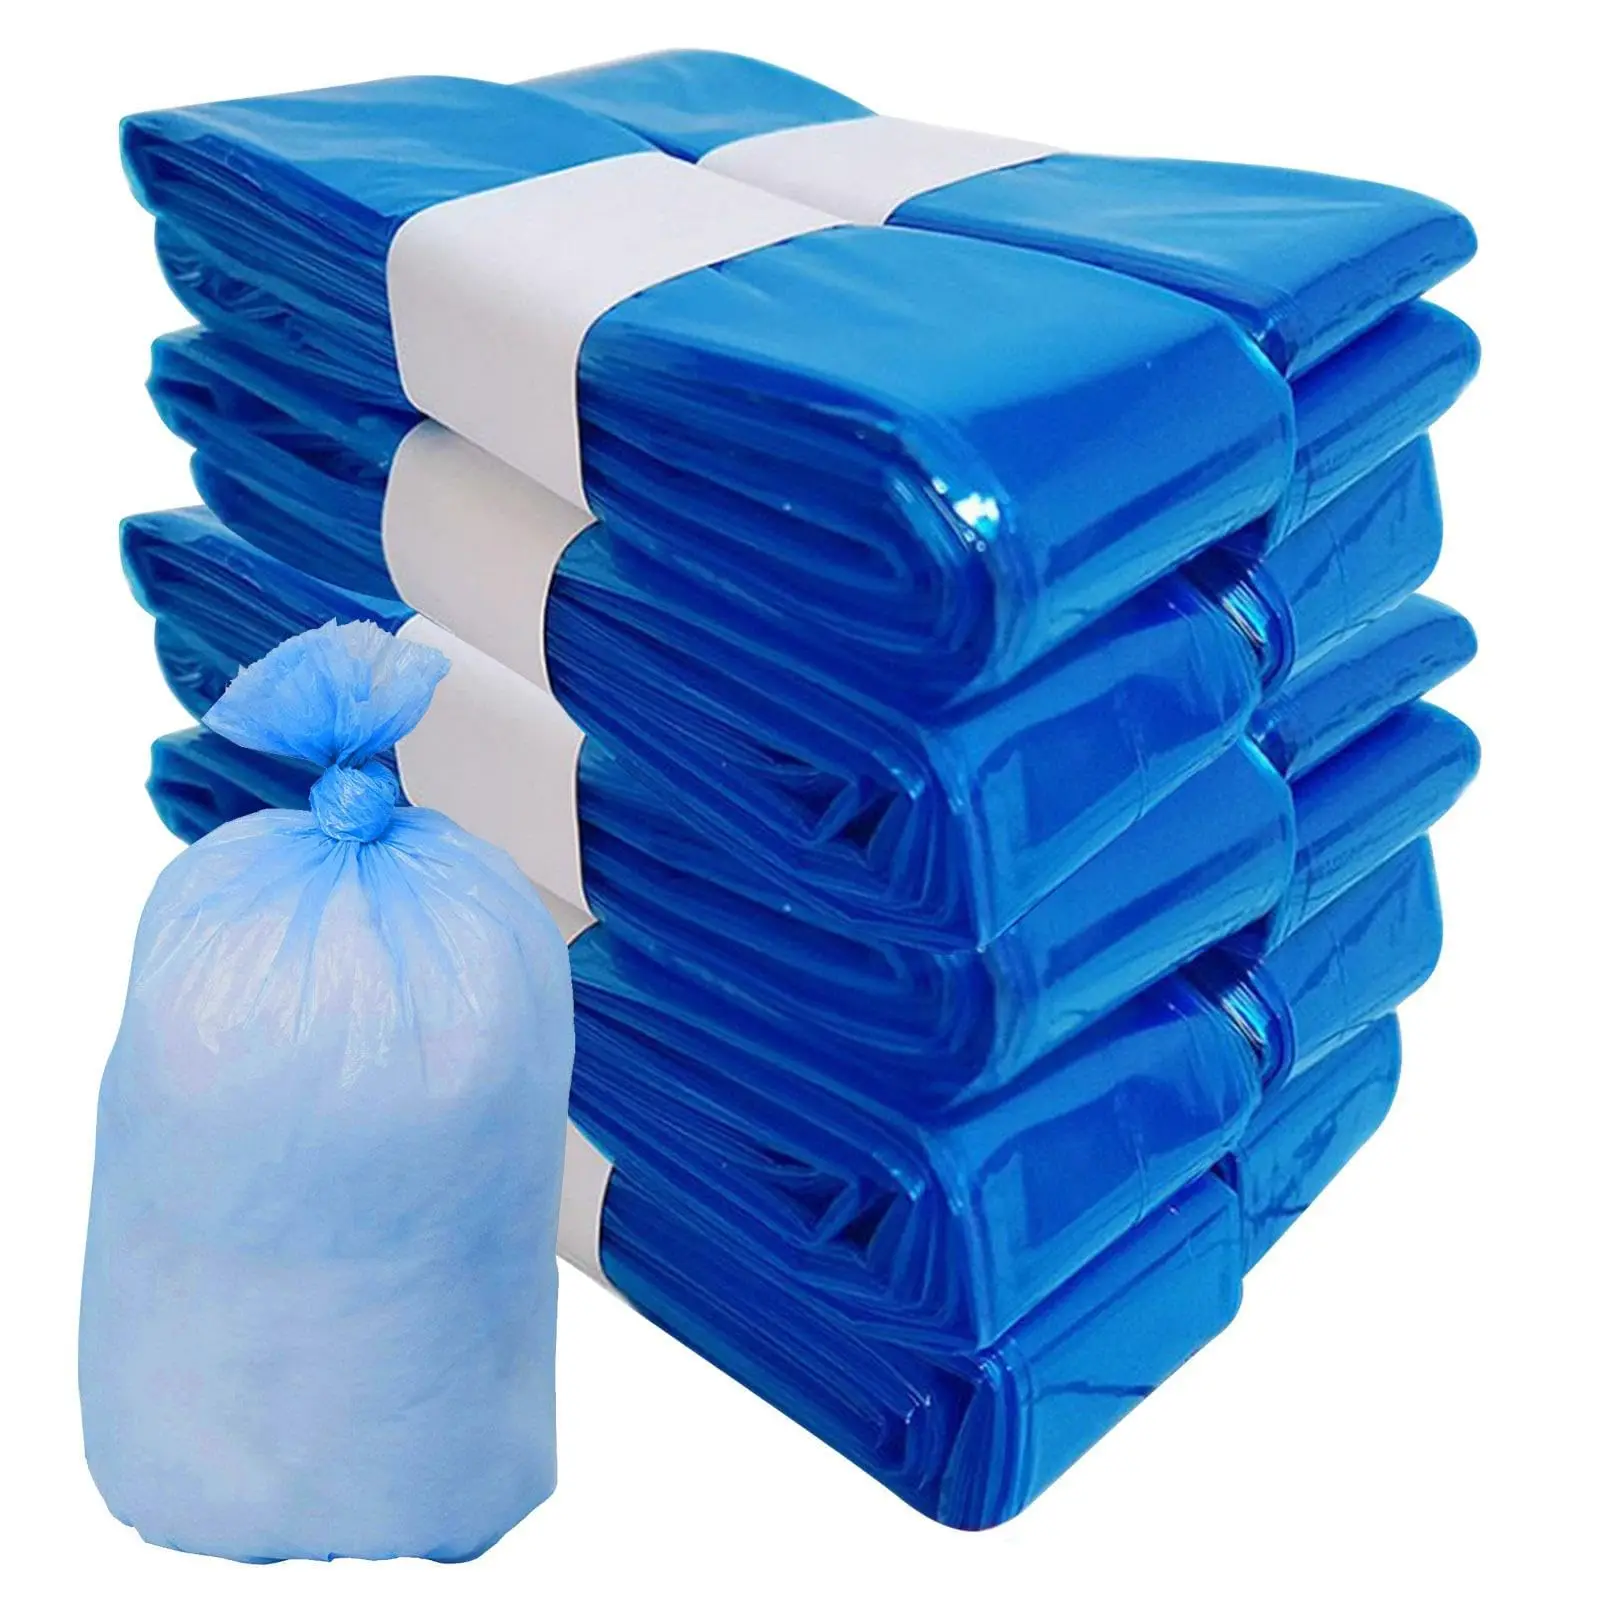 

Diaper Trash Bags 4.5M PE Diaper Pail Liners Sturdy and Reliable Scented Diaper Bags Nappy Bin Refills